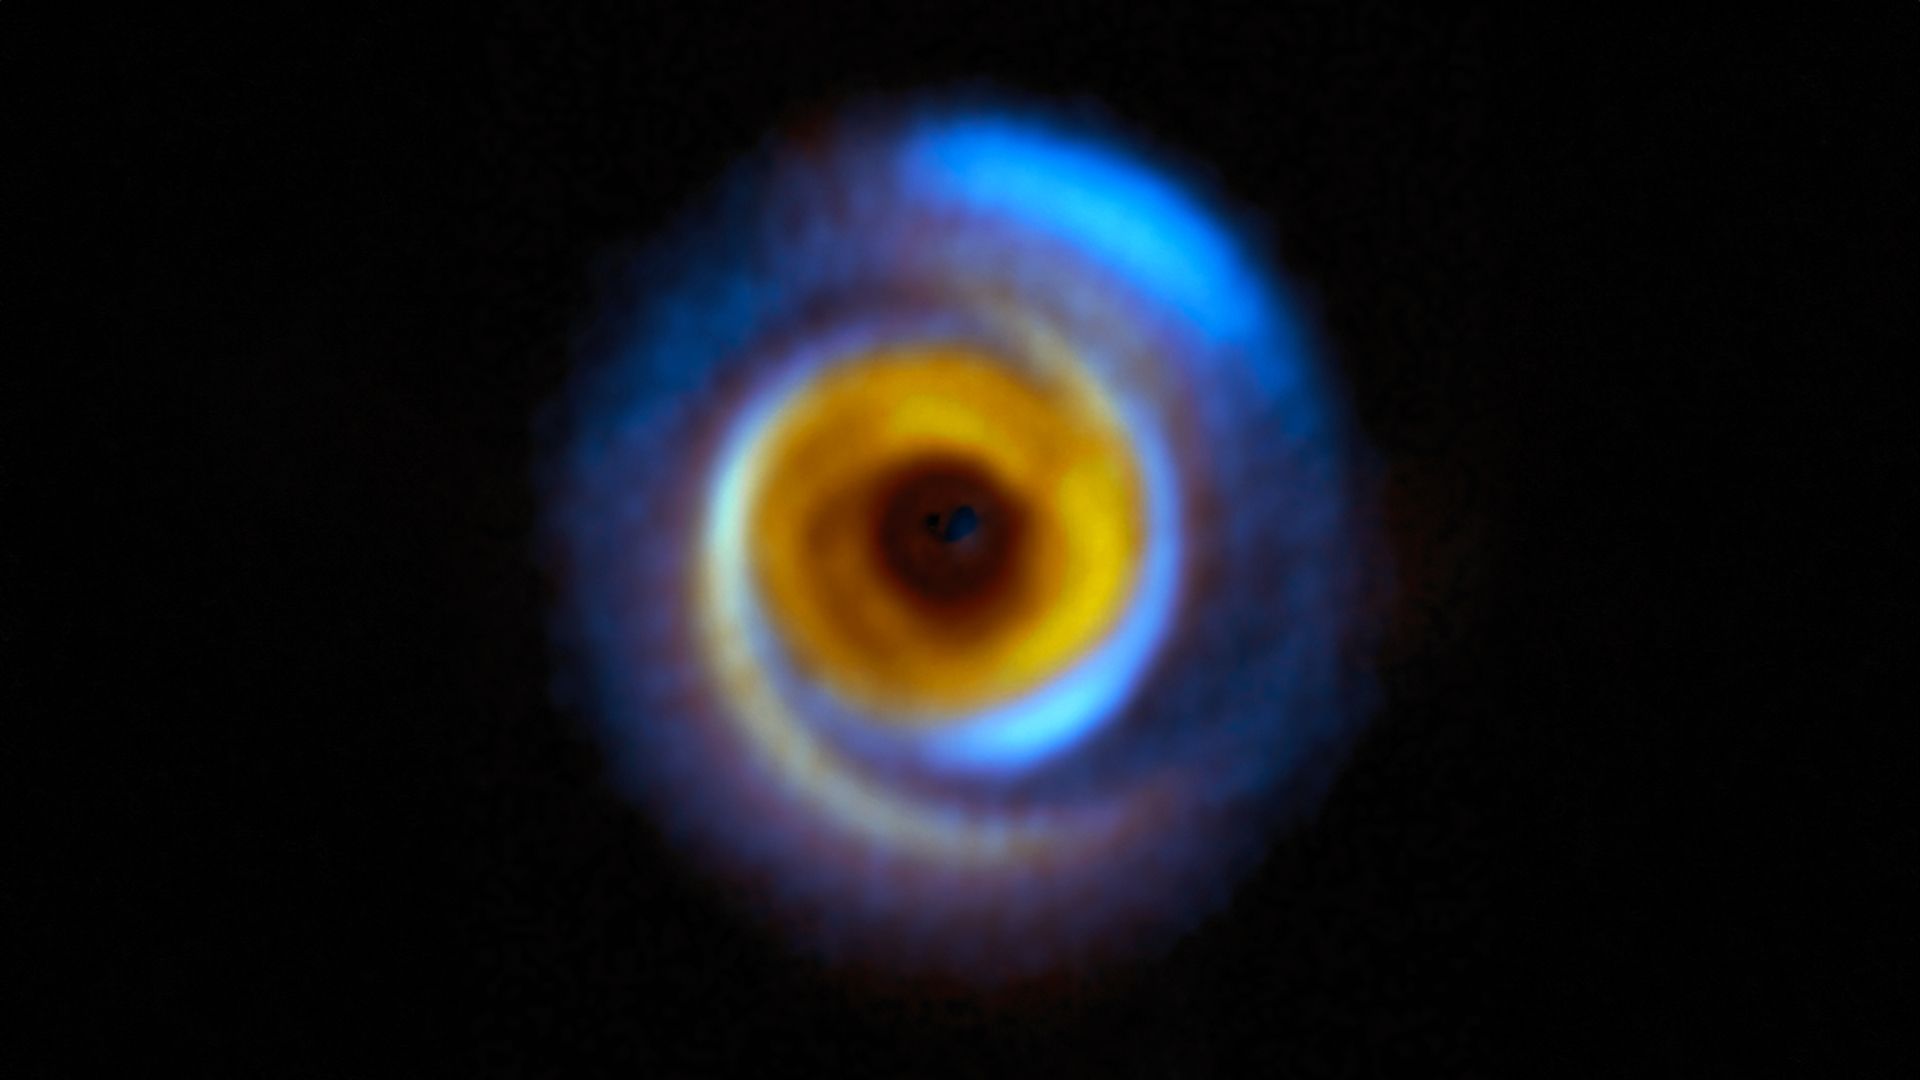 A circular blue disc with a smaller yellow disc inside. strands of both yellow and blue (different temperature material) are seen suggest the presence of forming planets.